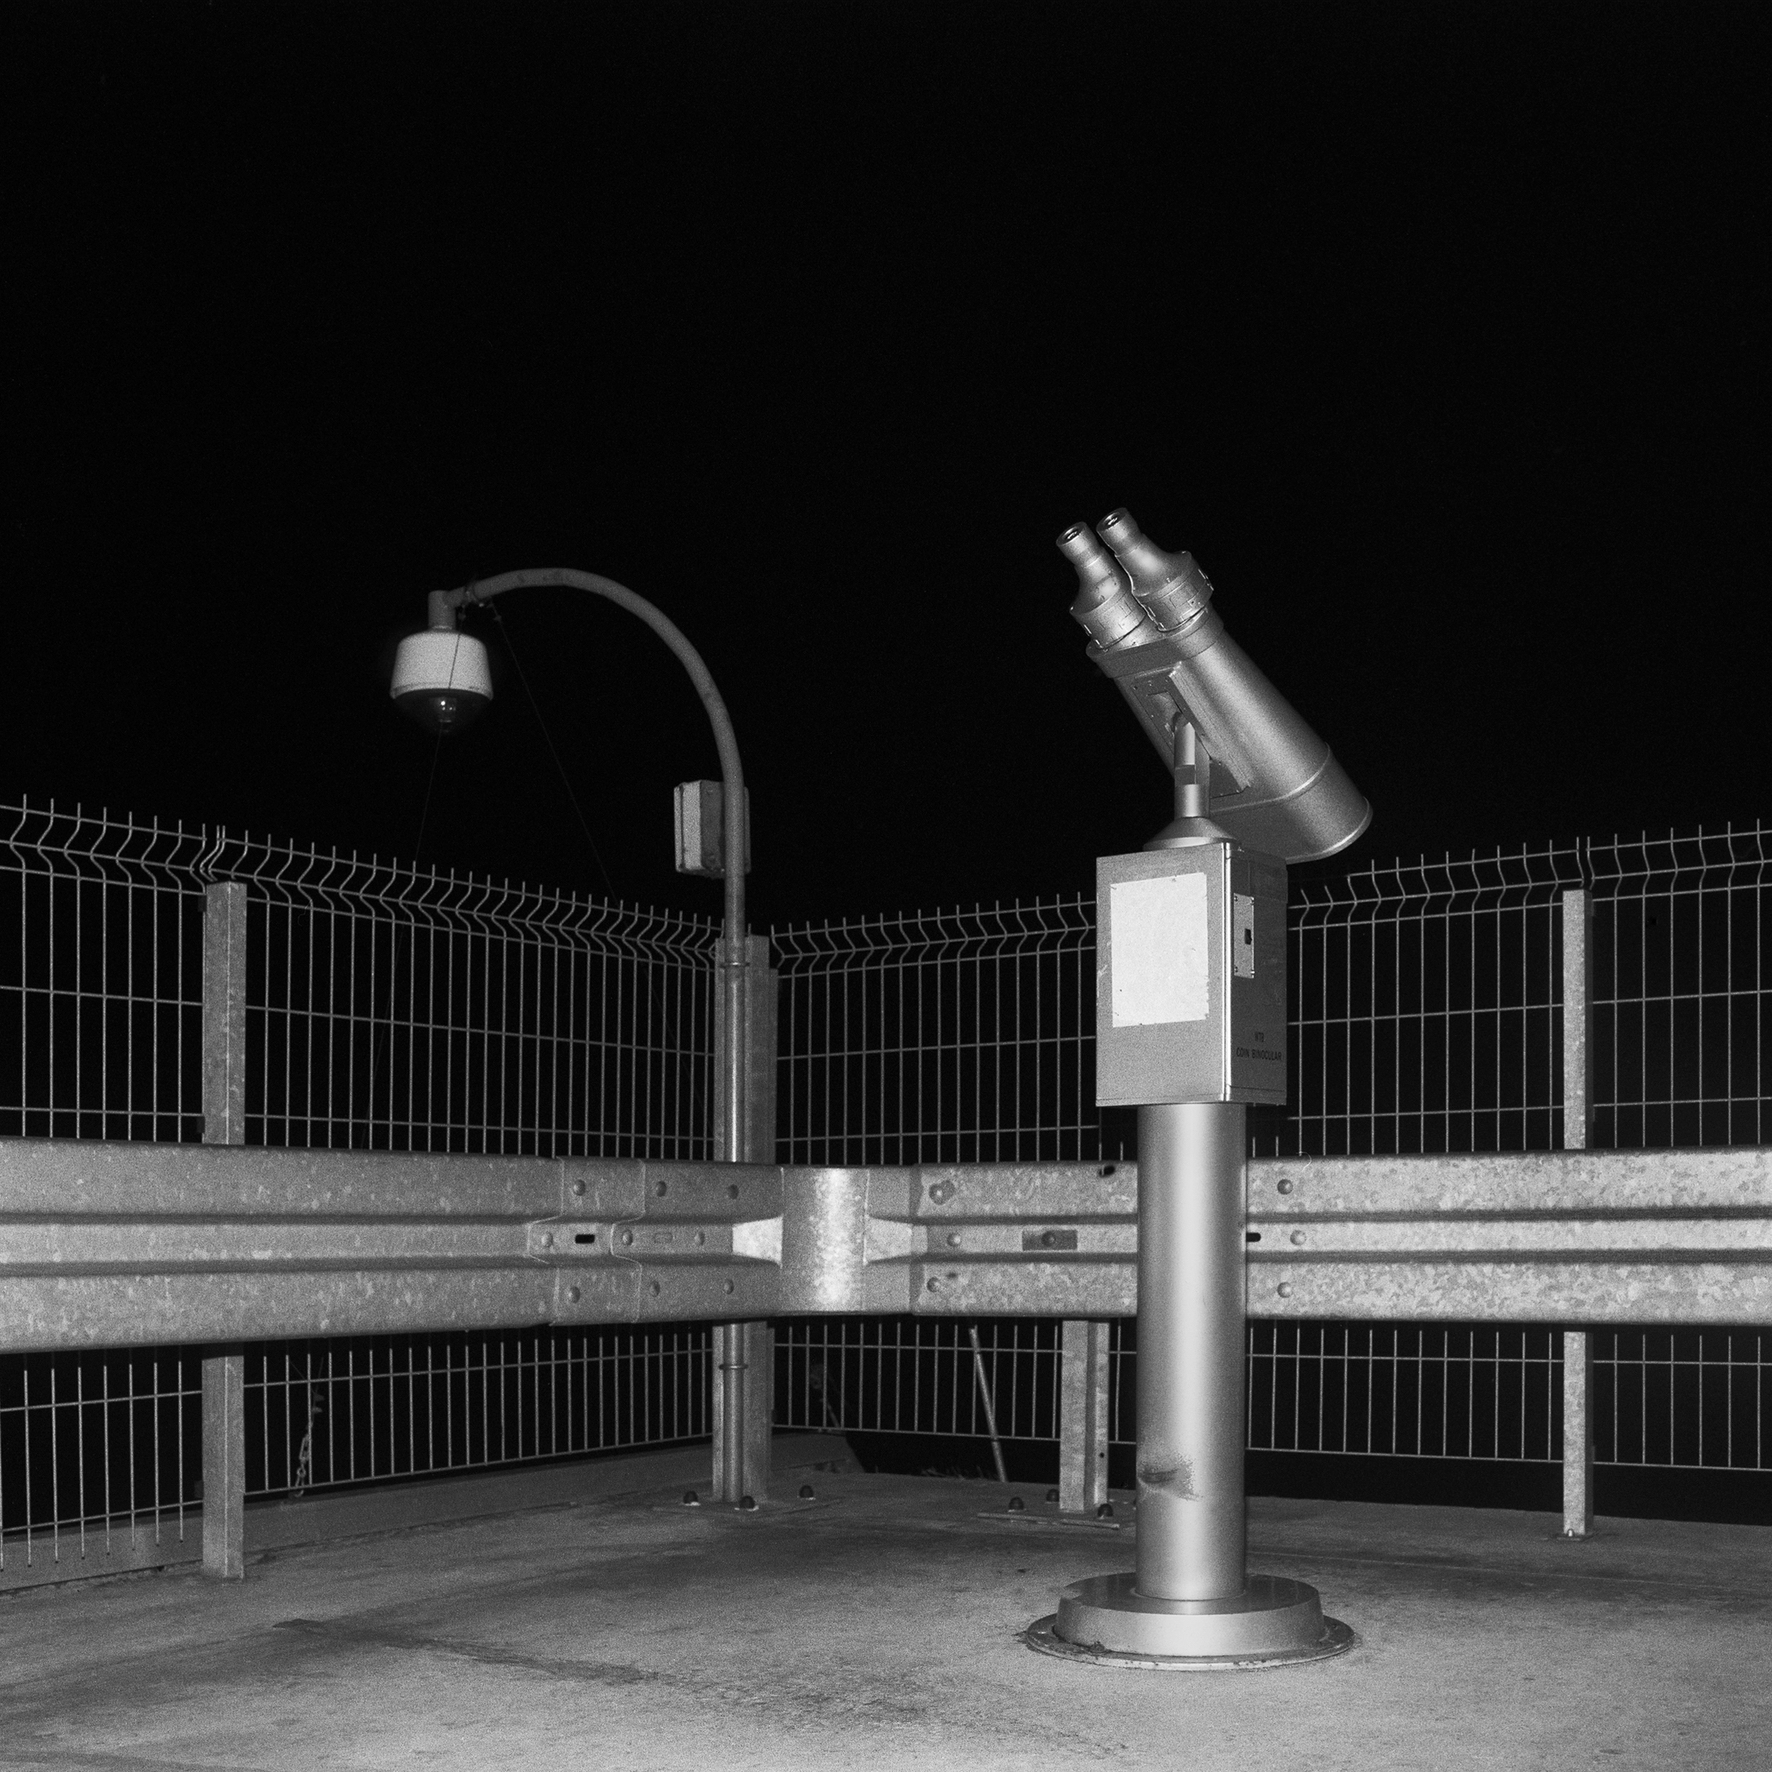 Square black and white photograph at night with flash showing corner of road with bollards, low fence, security camera and metal telescope on base.